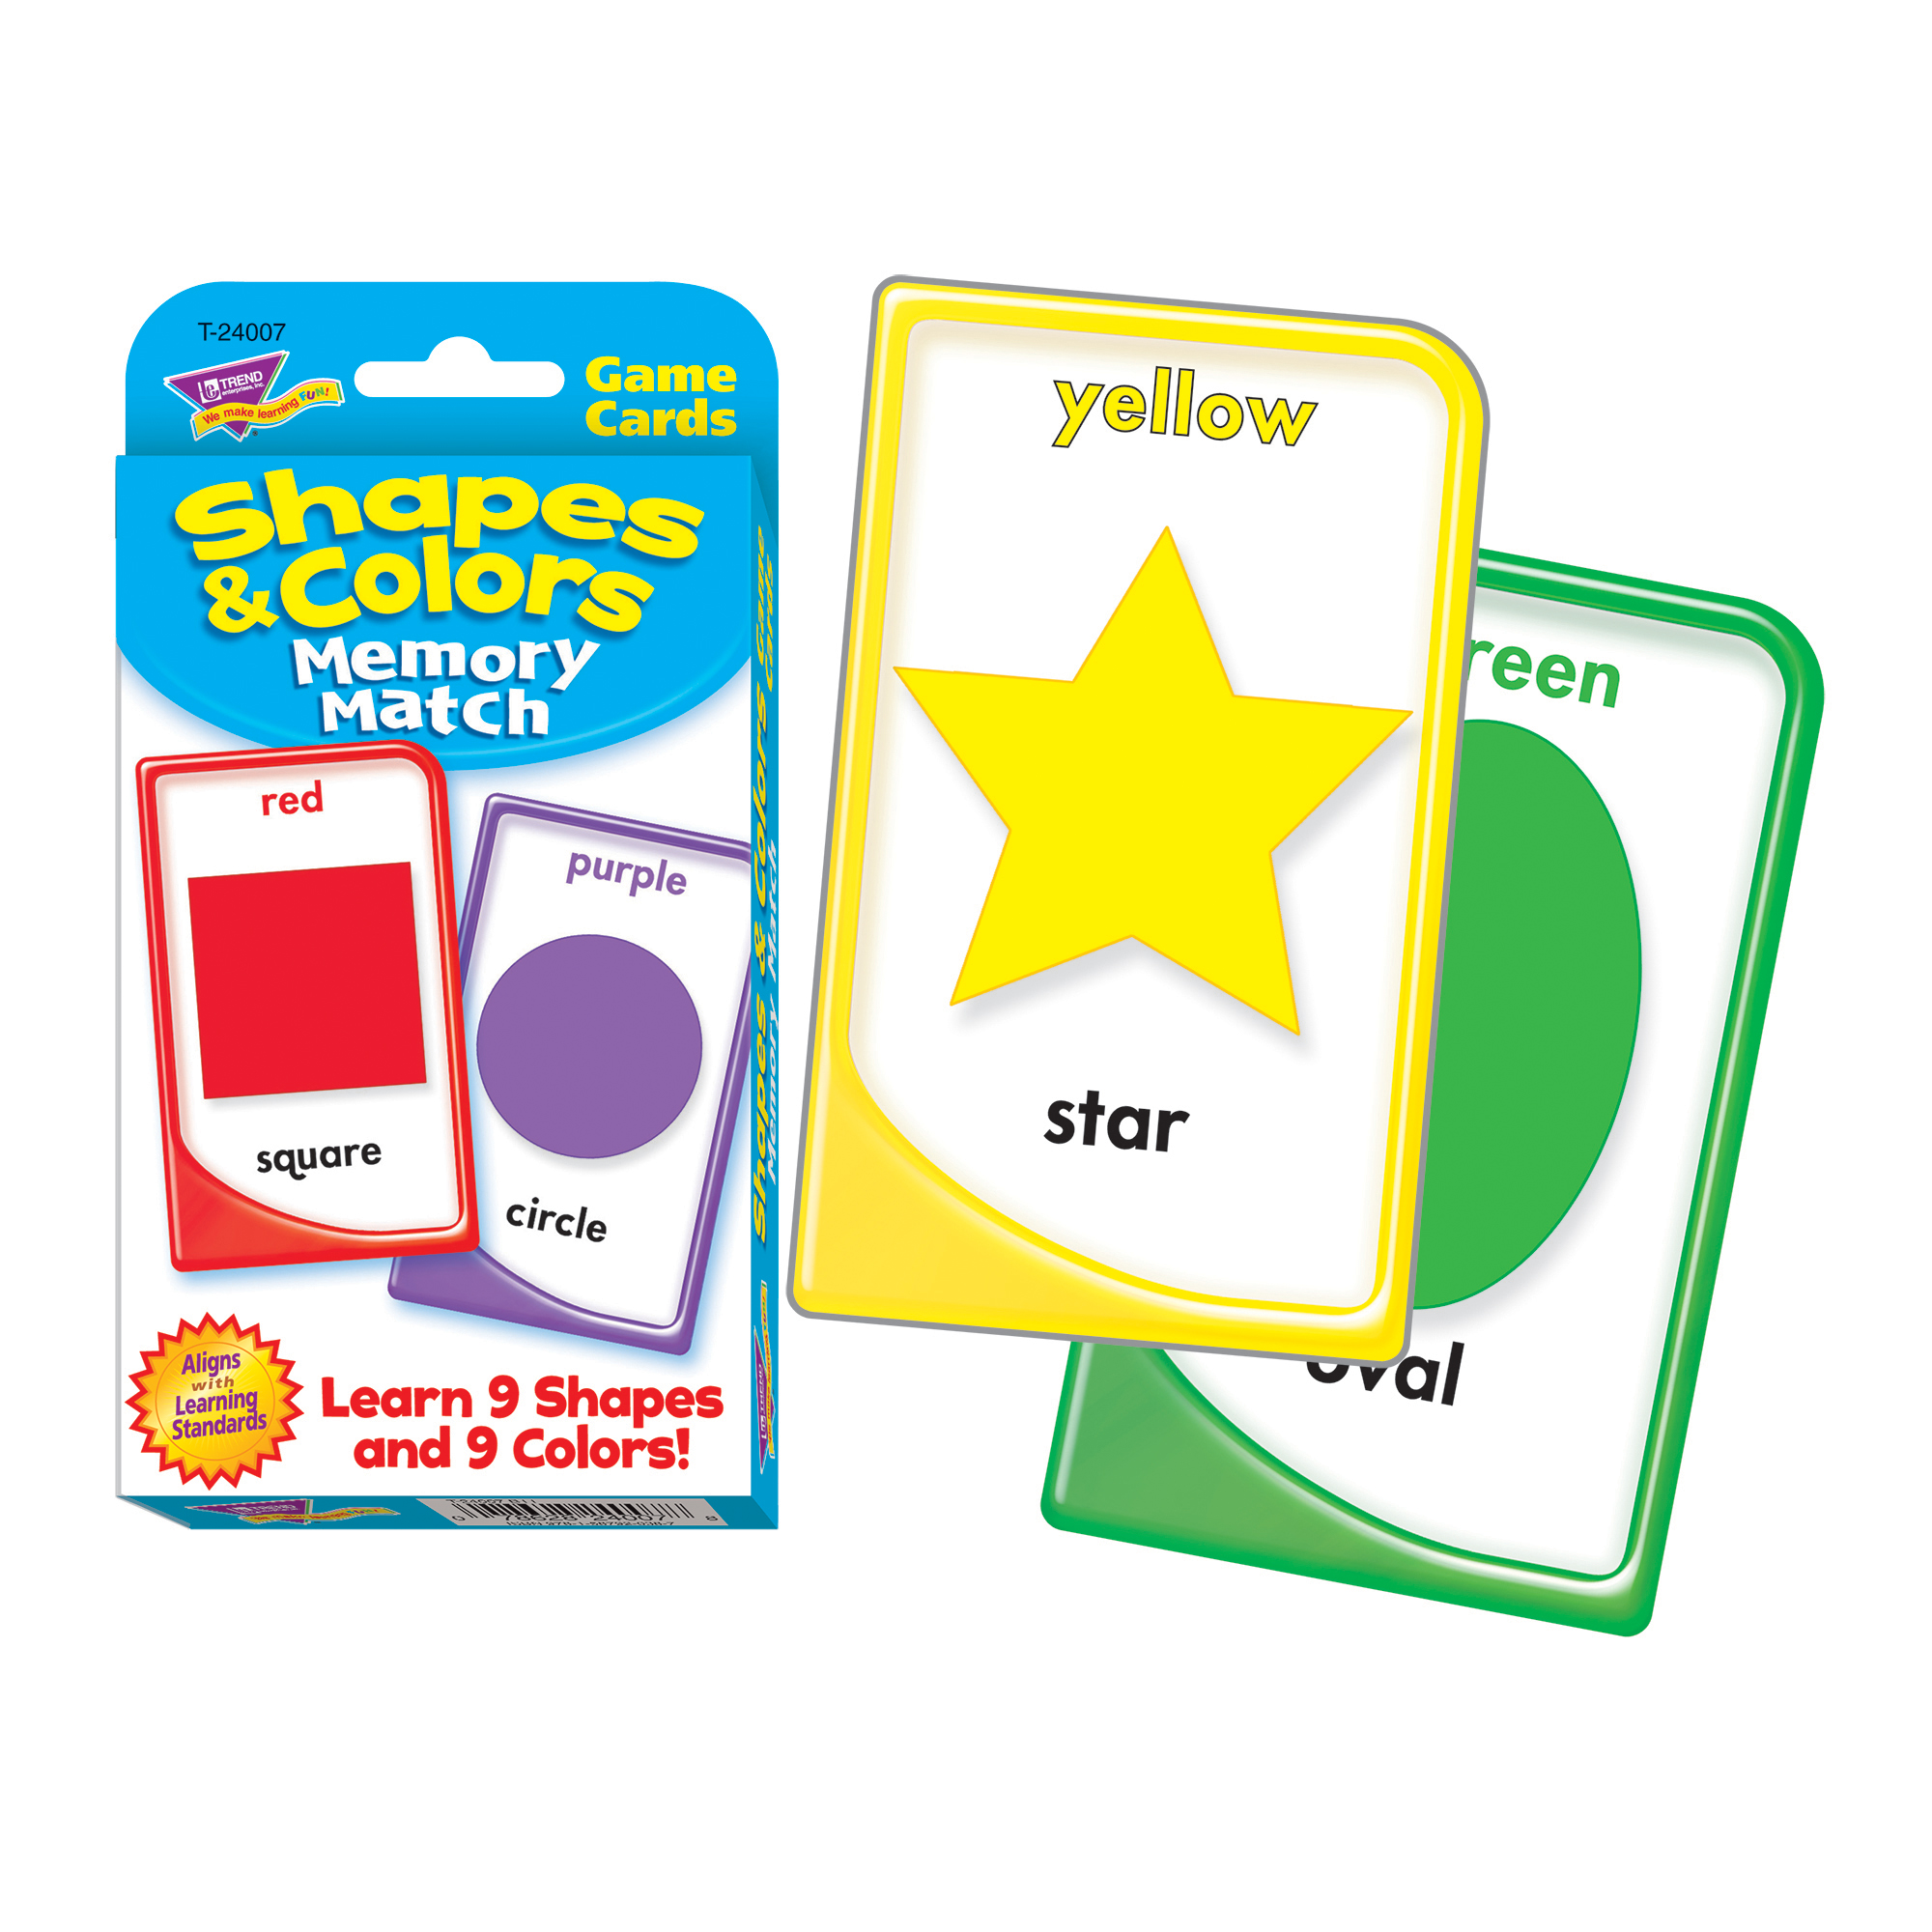 The Teachers' Lounge®  Numbers superShapes Stickers, 800 ct